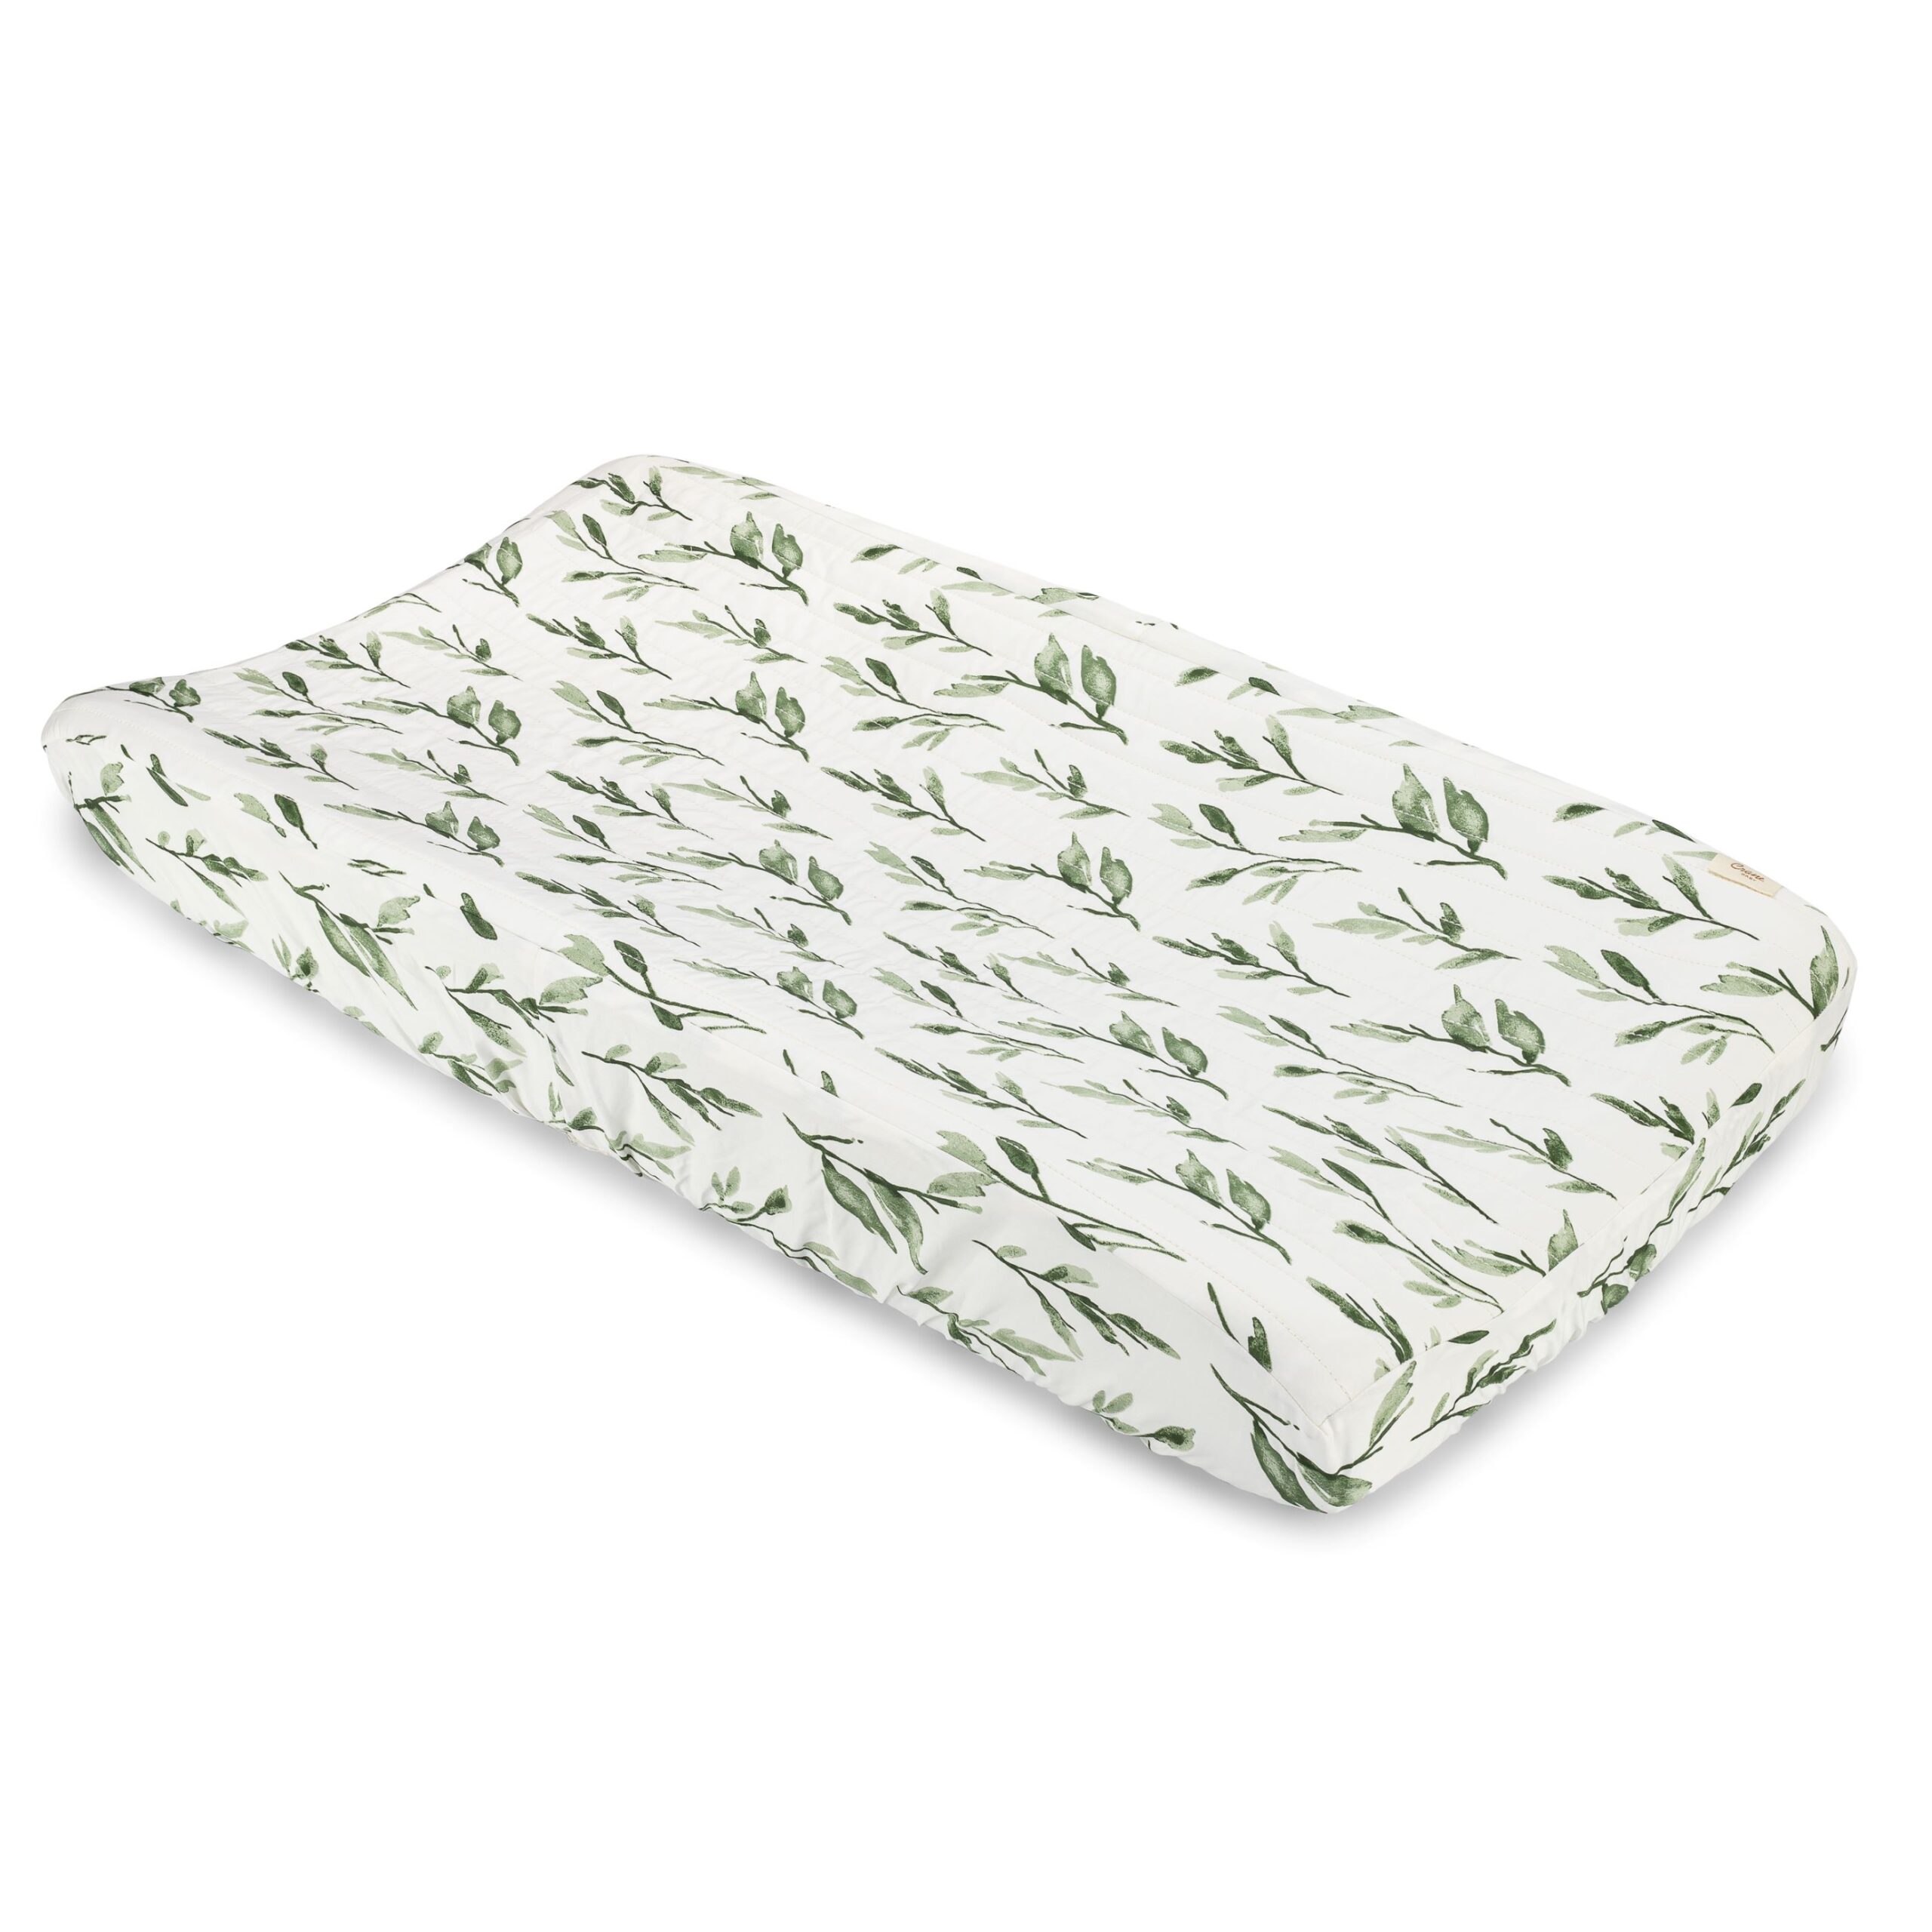 Change pad cover with leaf design on white background